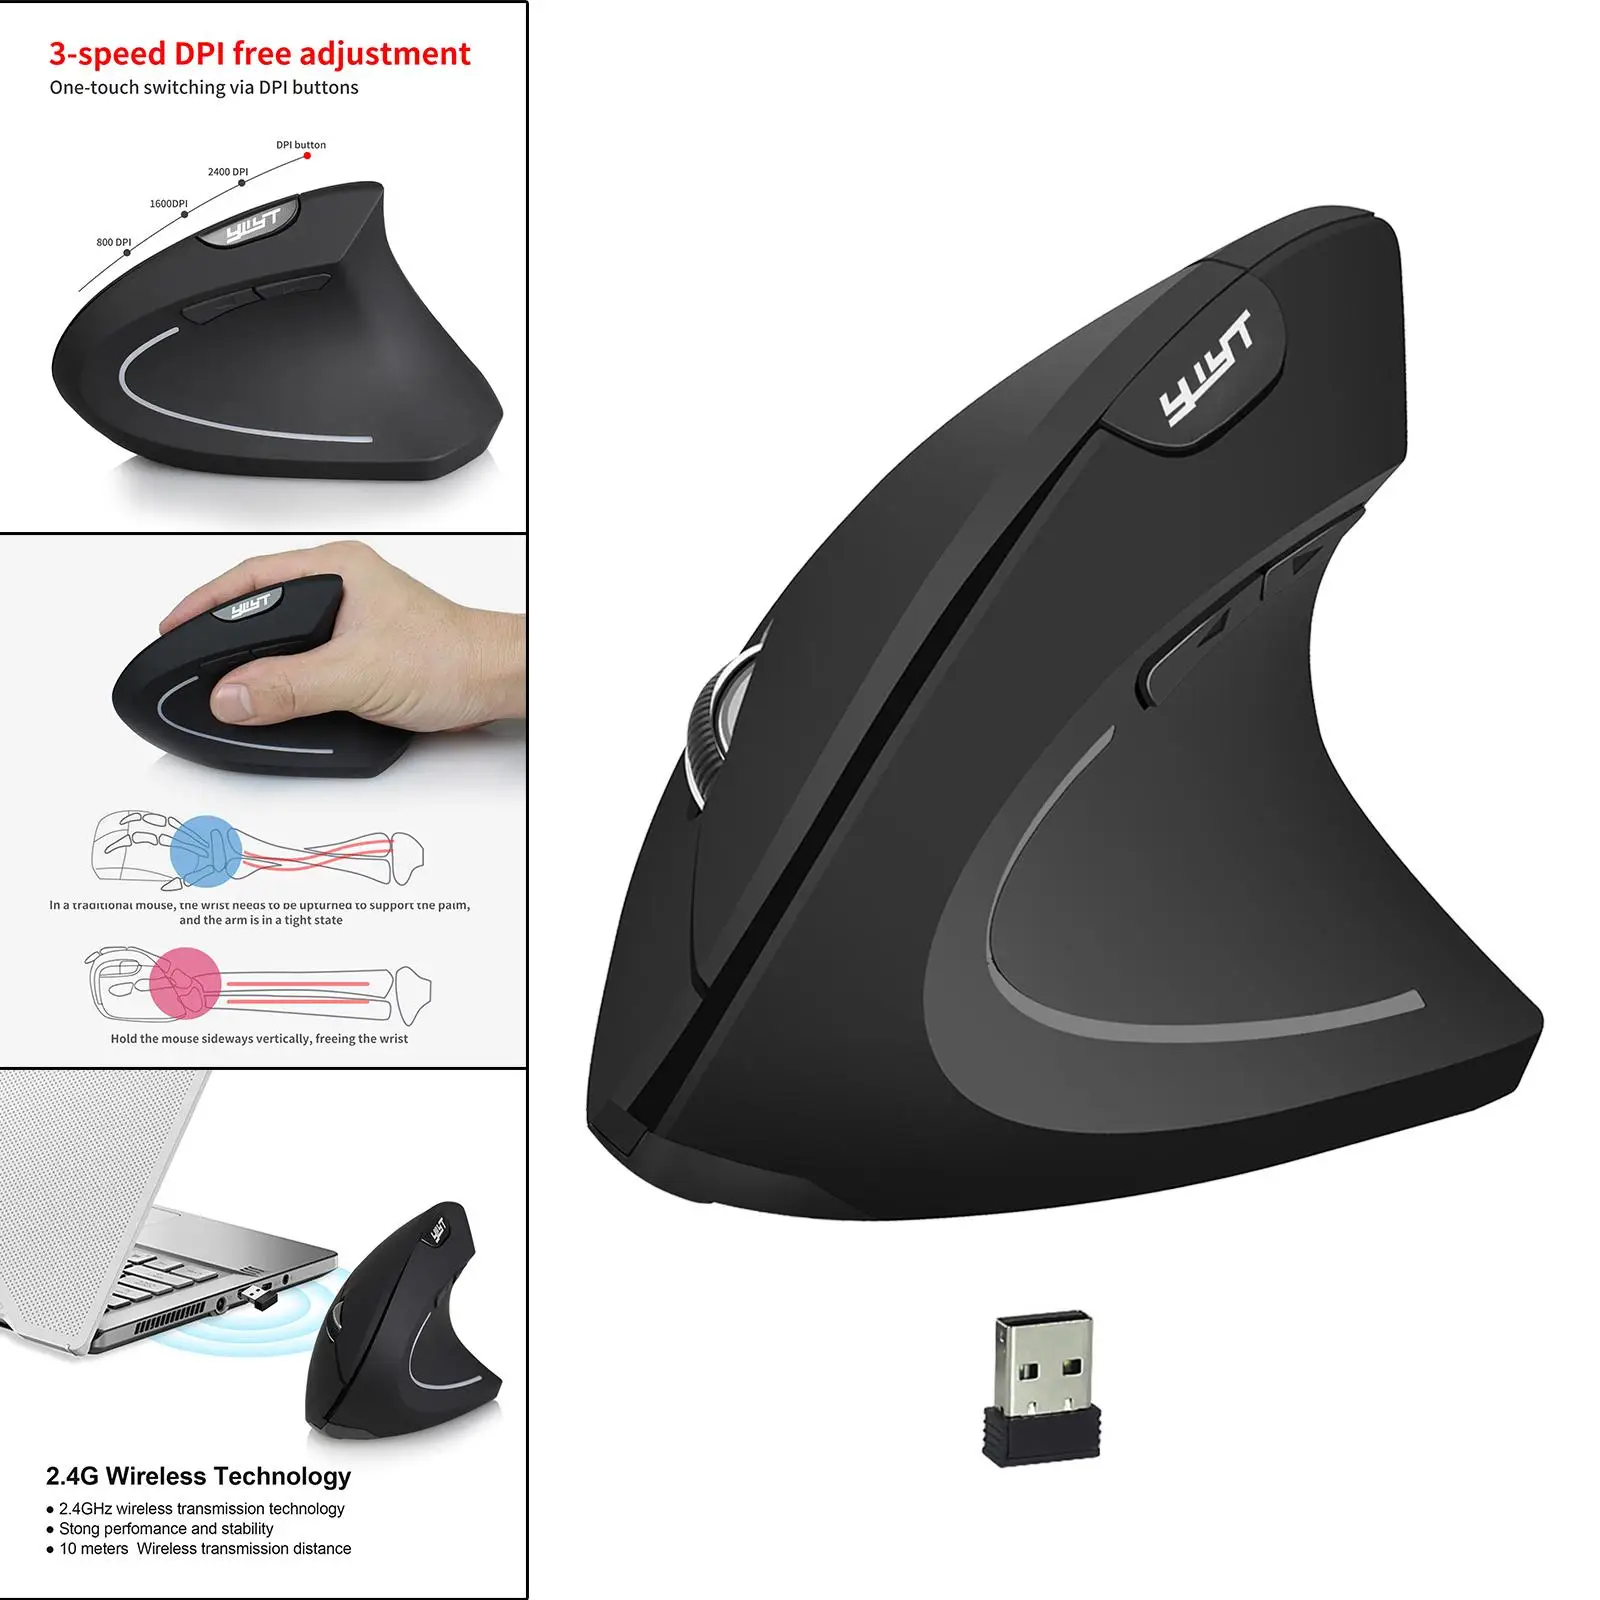 Vertical Mouse w/ USB Receiver 6 Buttons Small Mice for Laptop Desktop PC Reduce Wrist Pain 4 Adjustable DPI